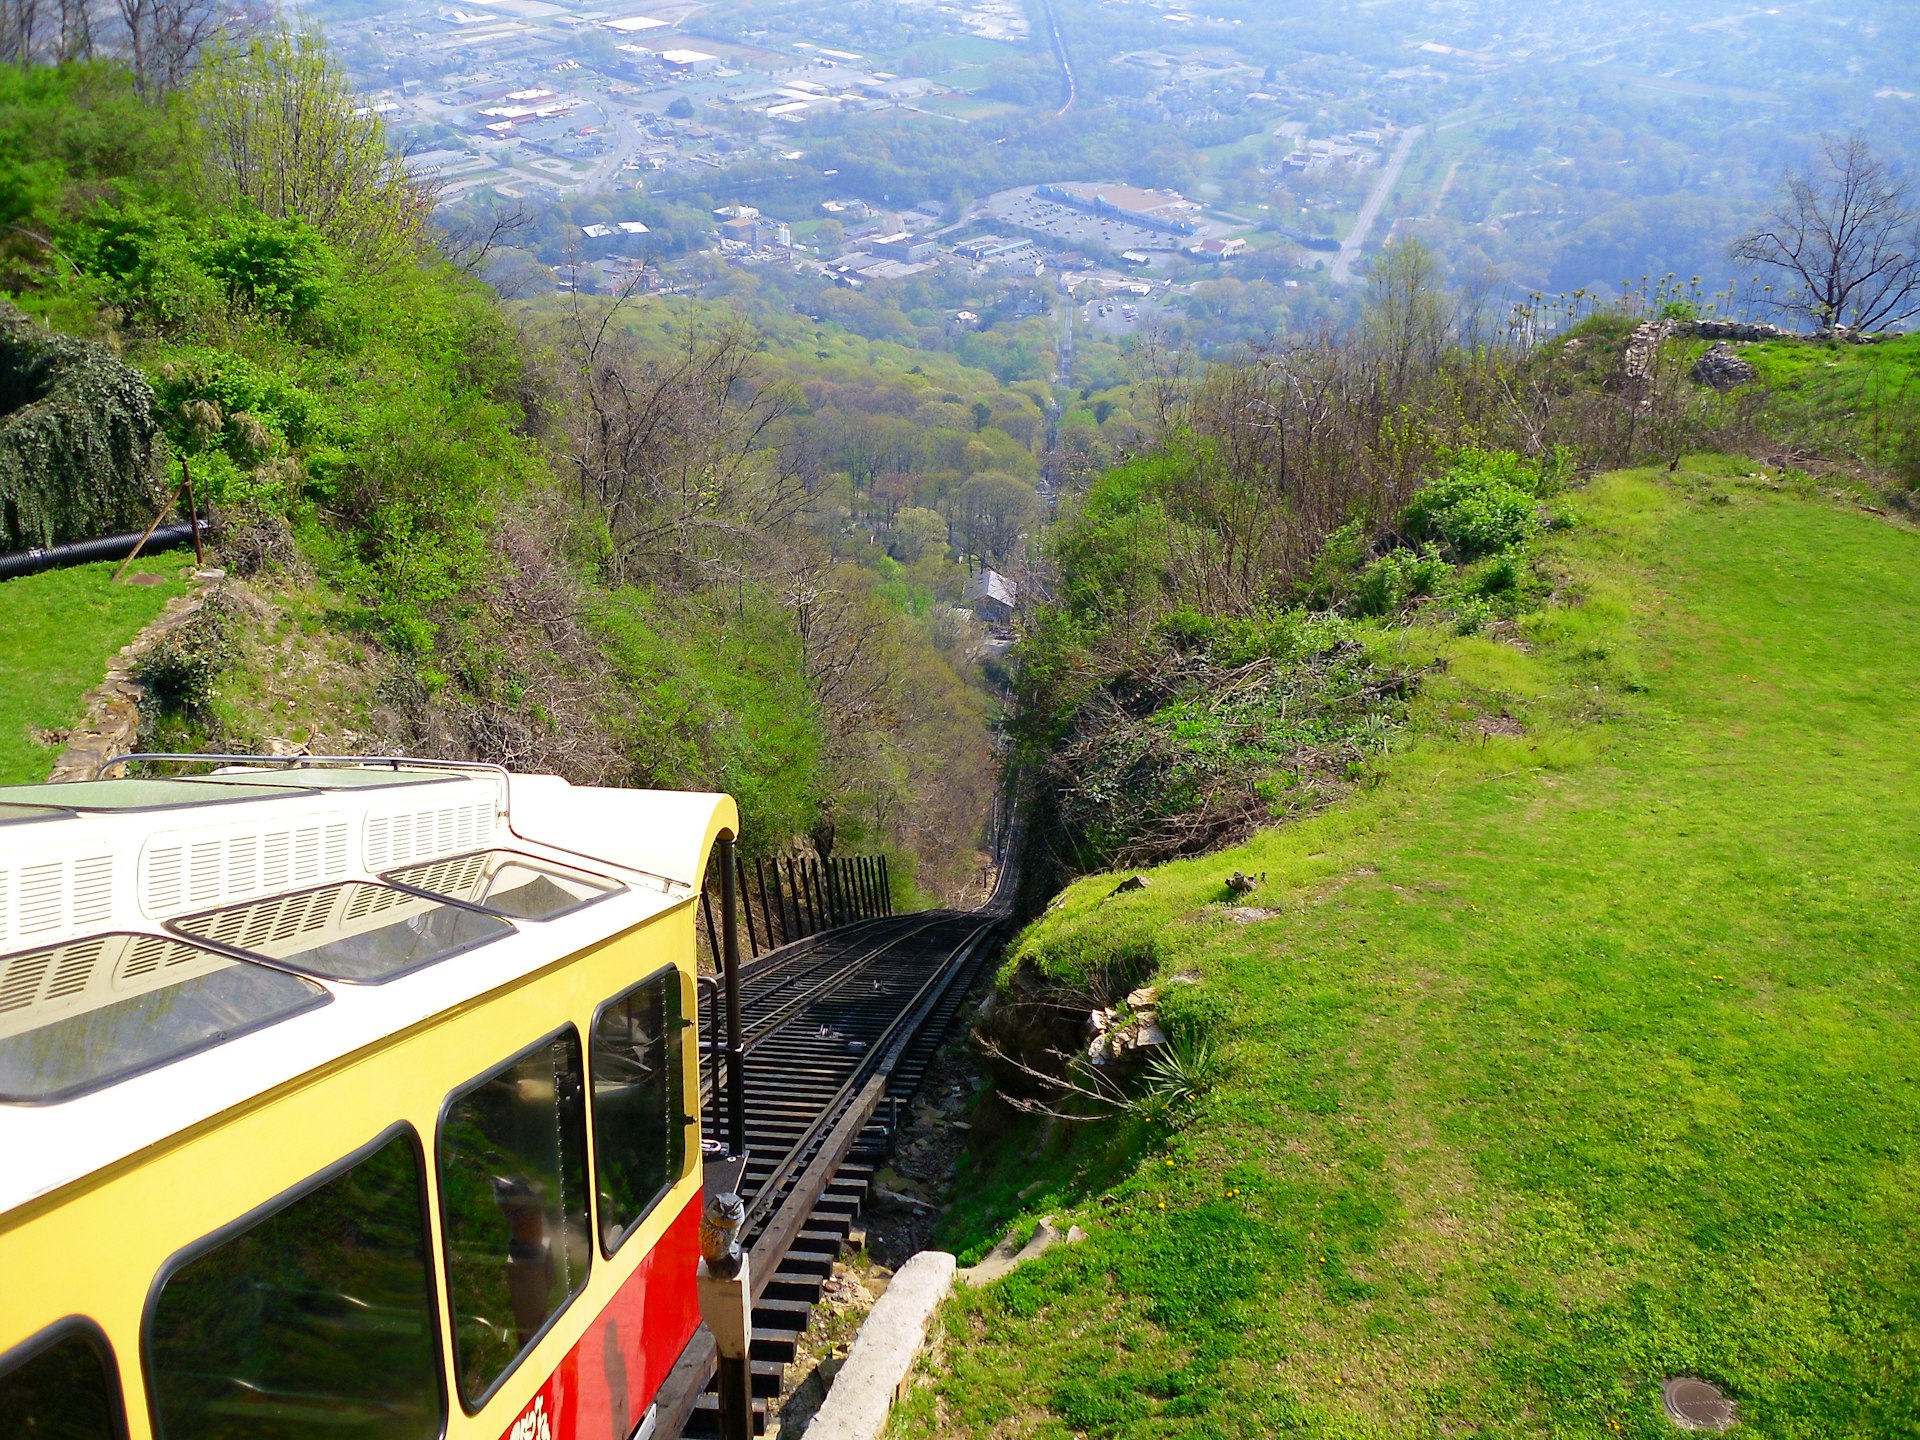 The historic Lookout Mountain Incline Railway